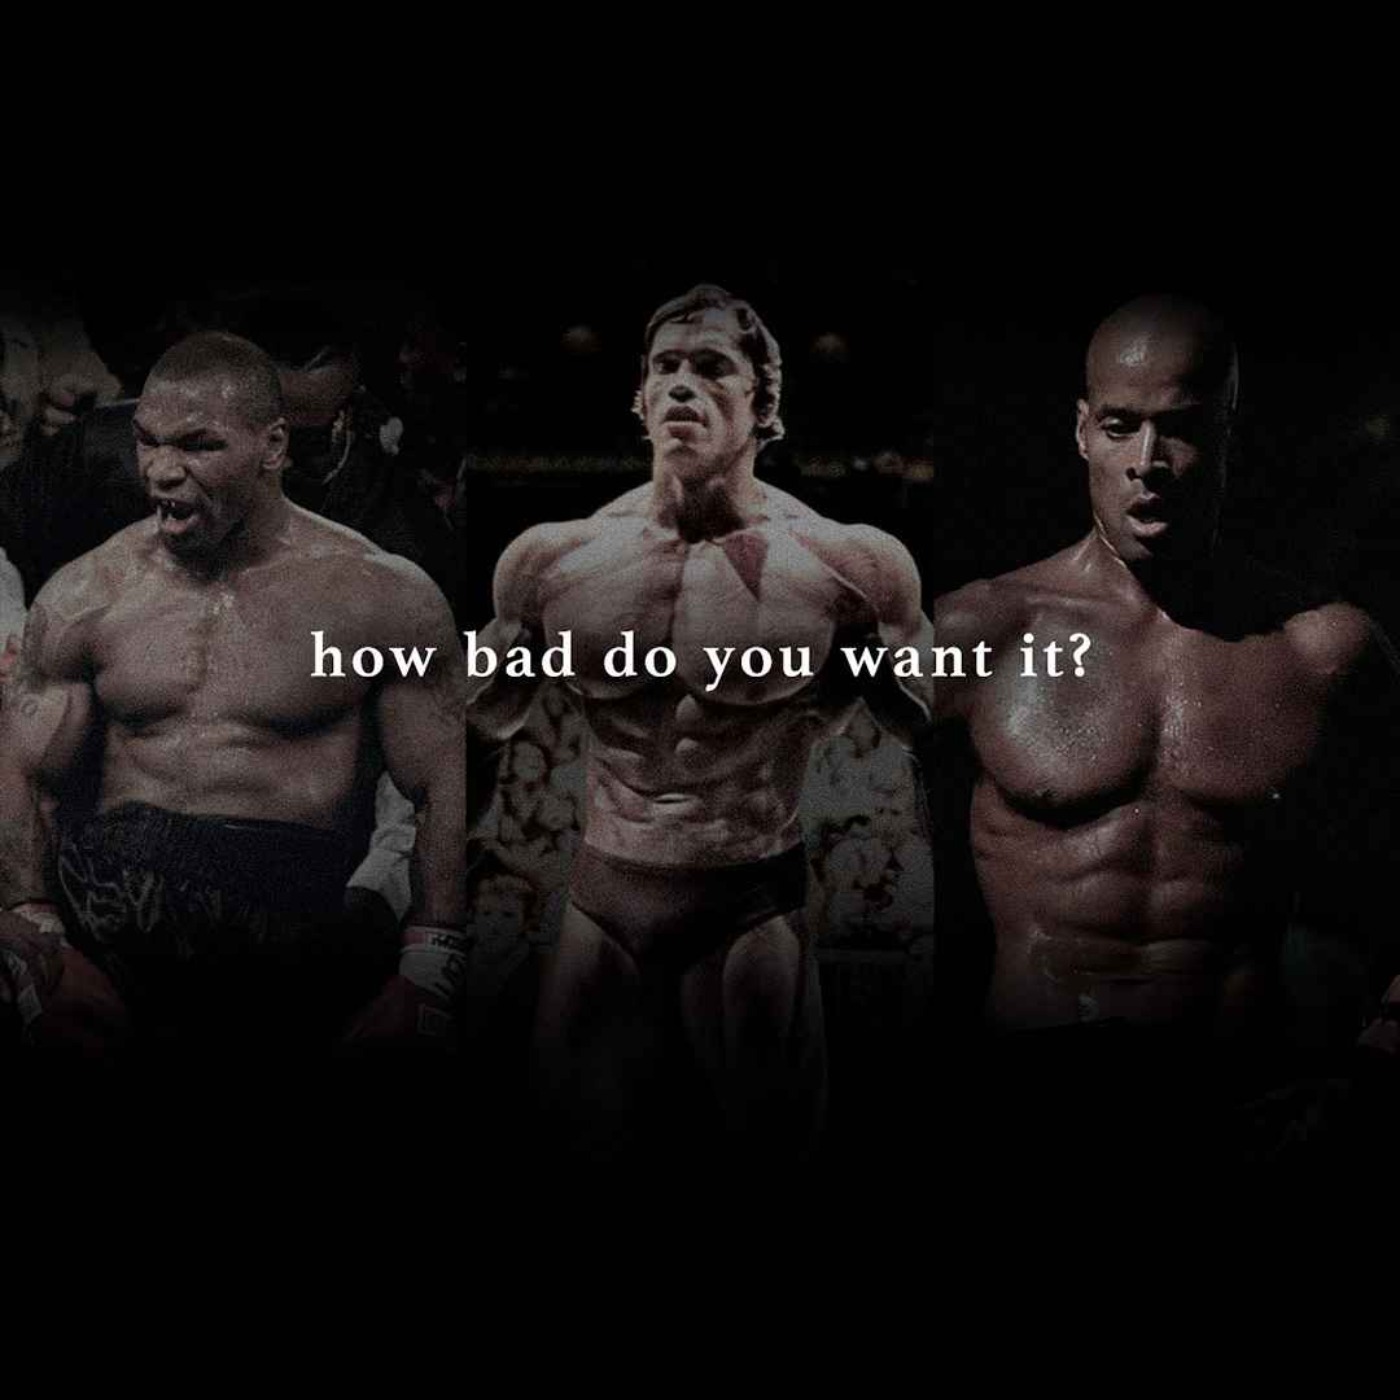 how bad do you want it? - Best Hopecore Motivational Speeches